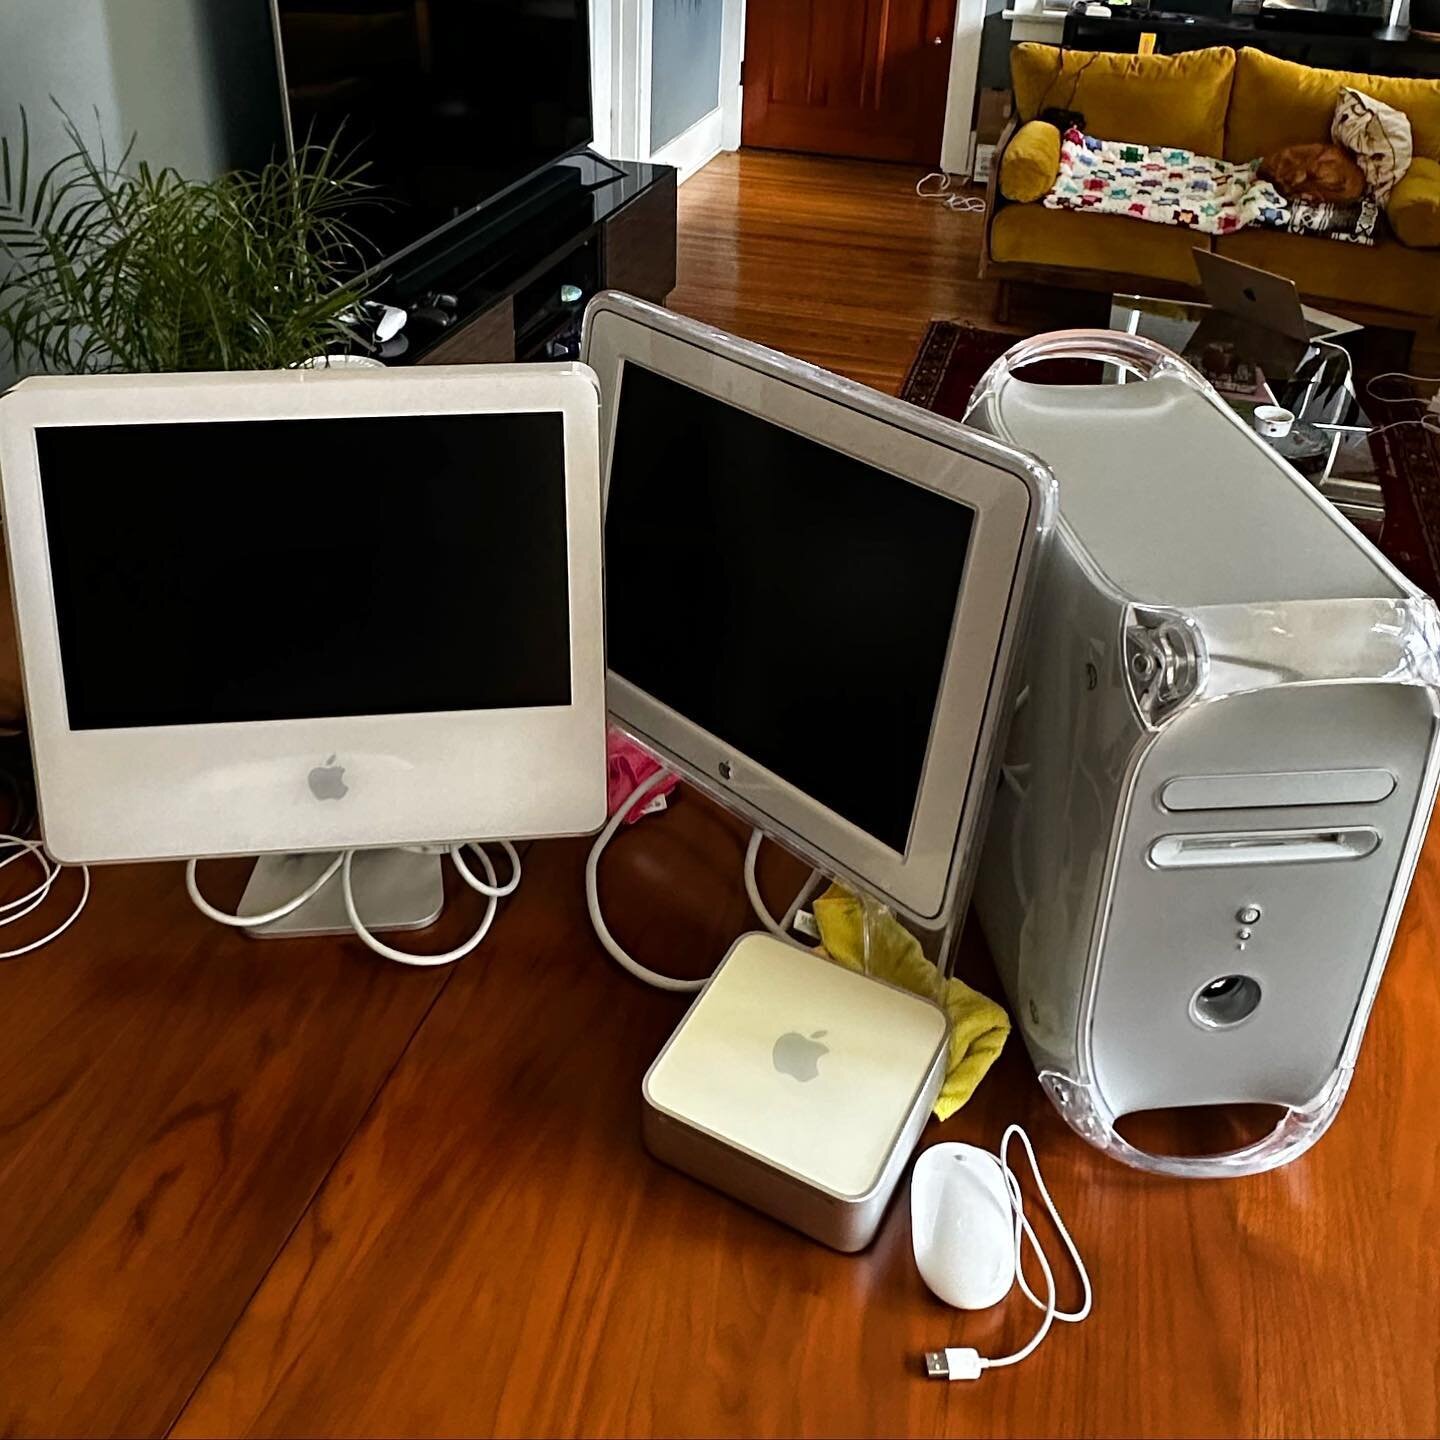 A trio of early 2000s #macintosh computers. From left to right, White 17&rdquo; iMac G5, 17&rdquo; Studio Display (M7649), Power Mac G4 Quicksilver, and an early 2000s Mac Mini. These machines date between 2002 and 2006 a time many regard as a low po